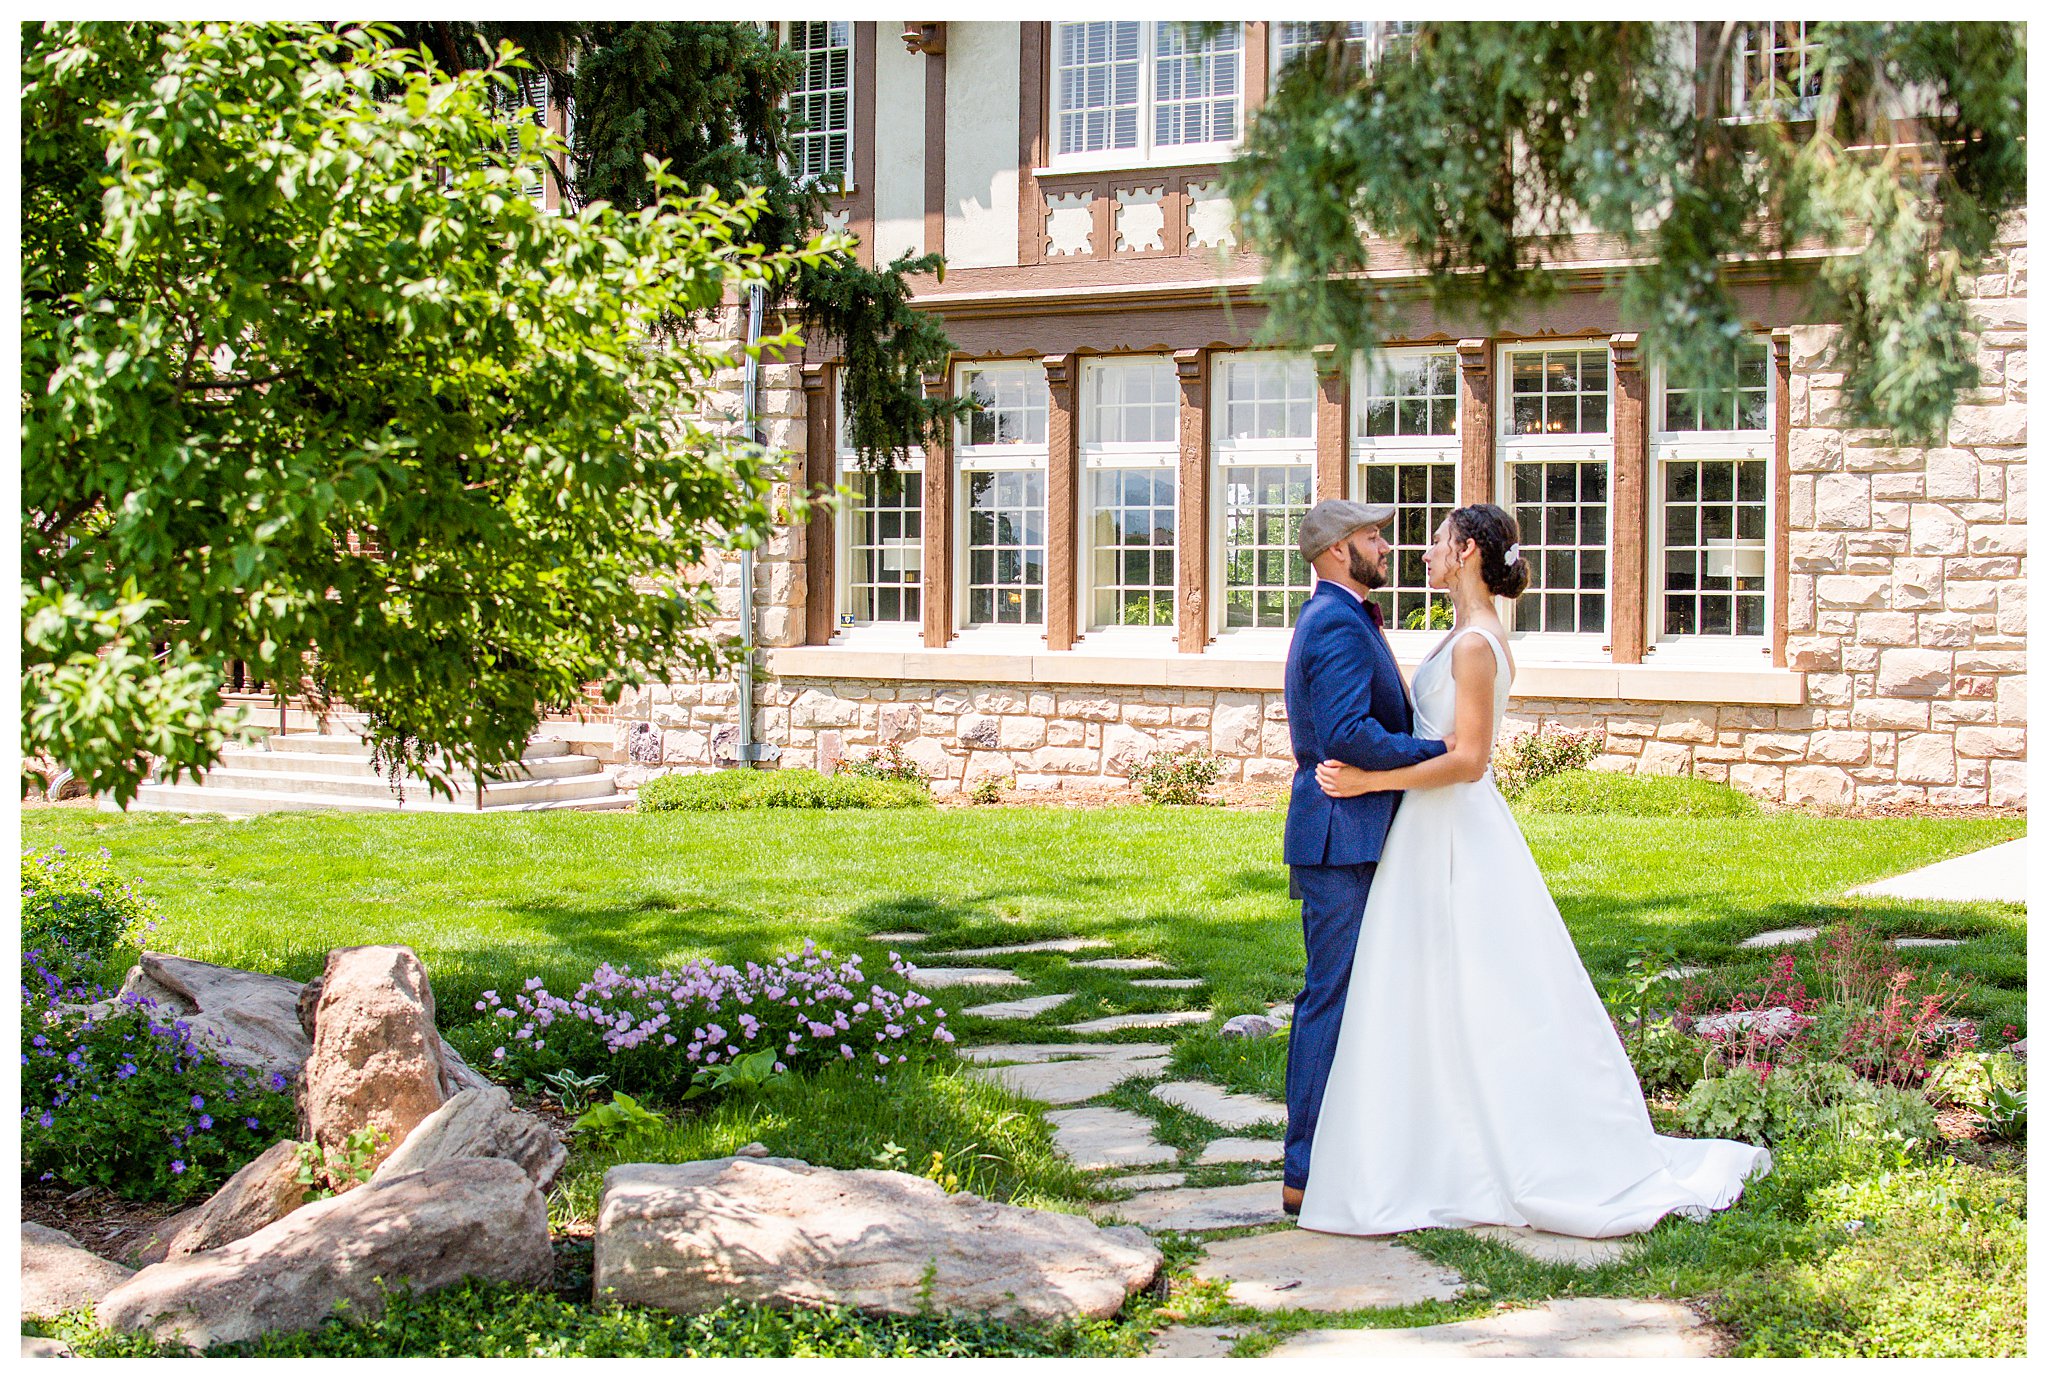 A bride and groom pose for bridal photos before their mansion wedding